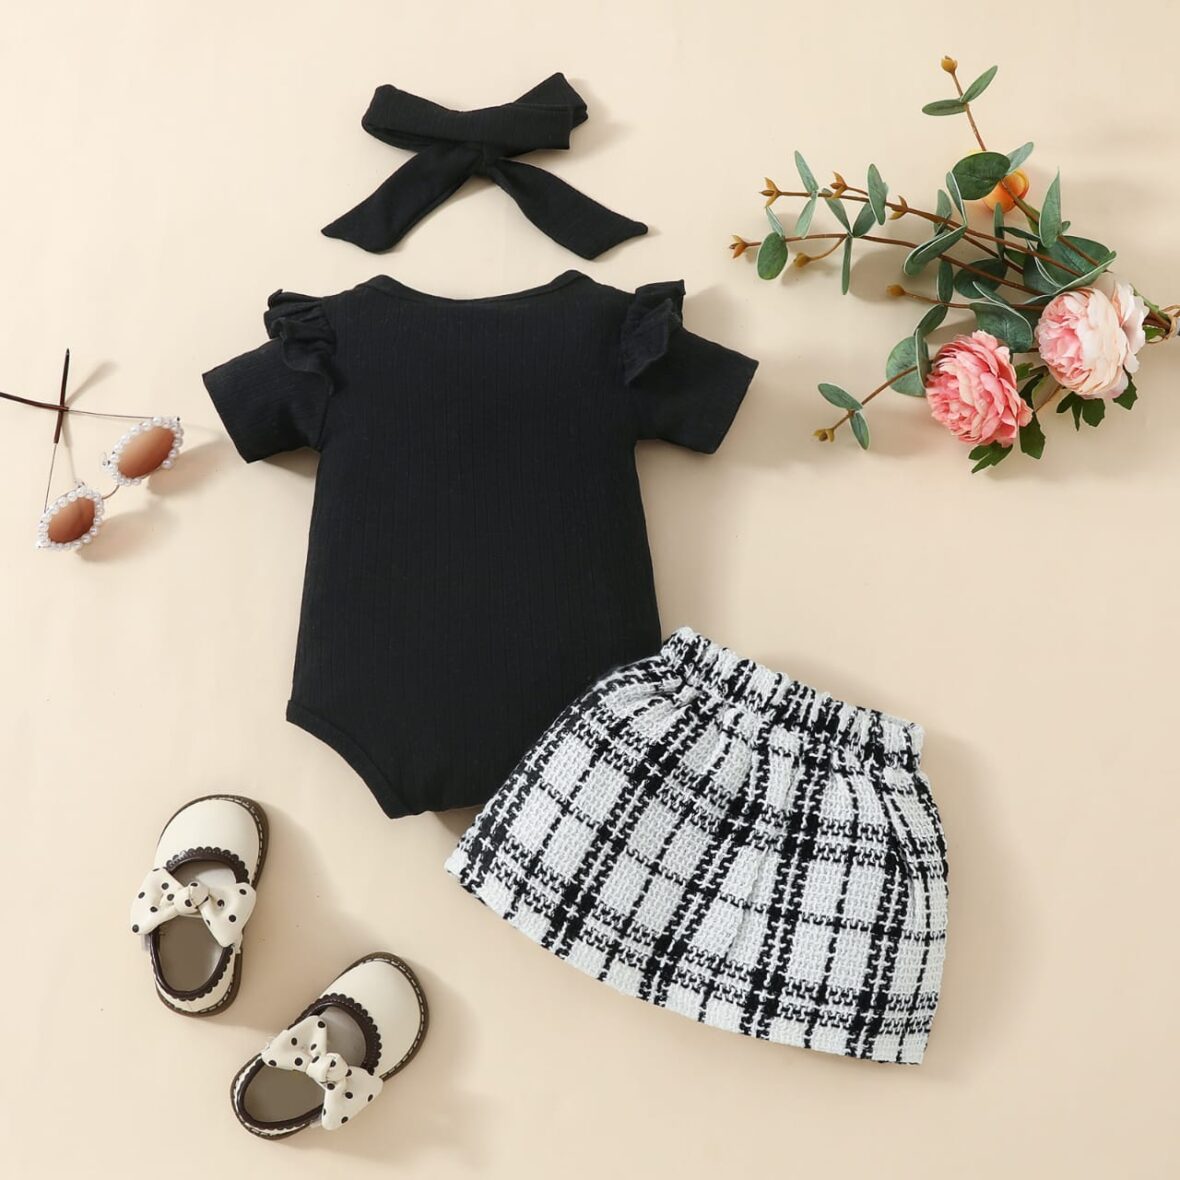 New Born, Baby Girl Black Top With Plaid Skirt1